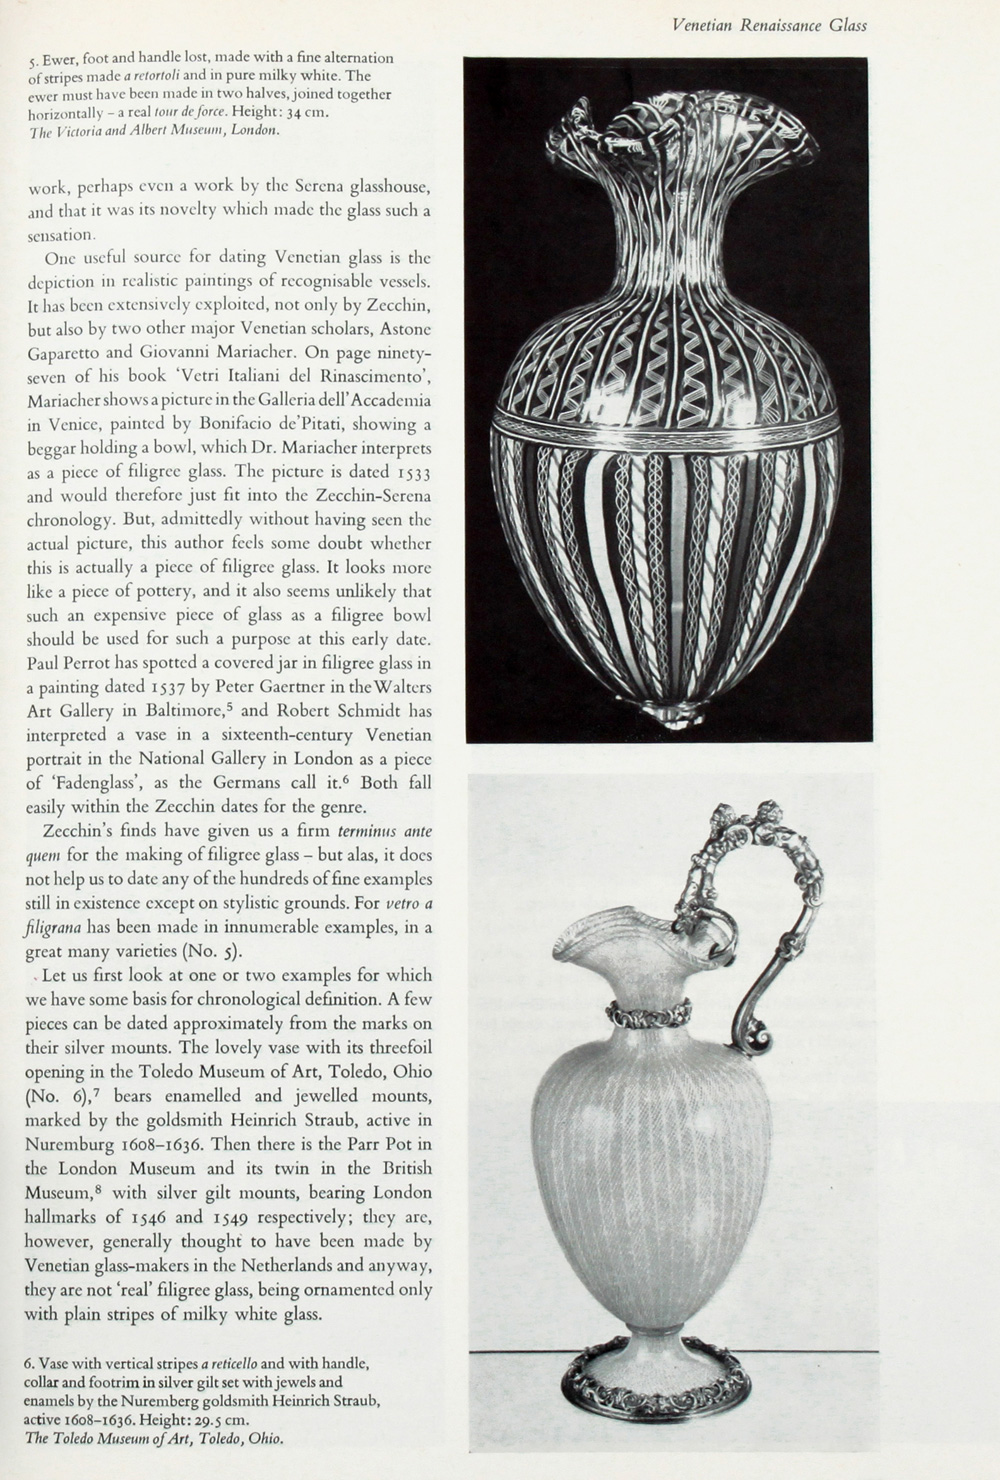 The CONNOISSEUR back issues - August 1976 - Venetian Renaissance Glass - problems of dating vetro a filigrana by Ada Polak - Page 273